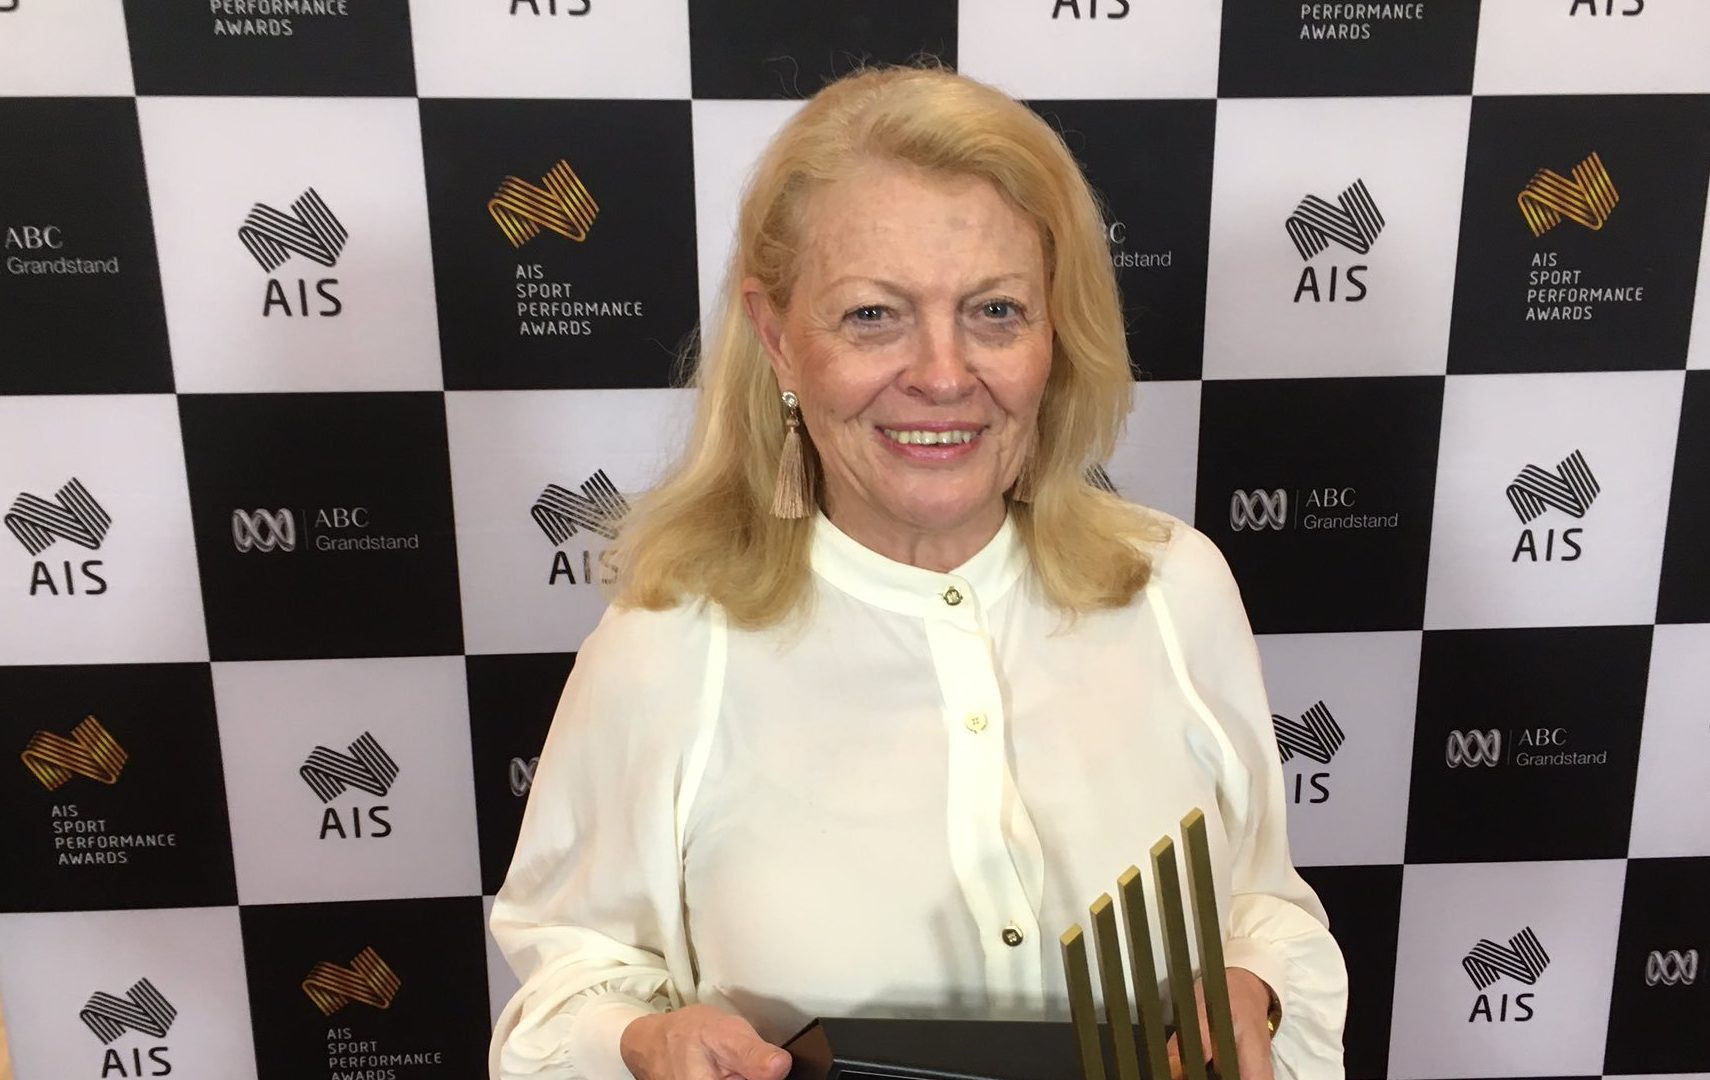 Paralympics Australia chief executive Lynne Anderson received the Award for Leadership at the AIS Sport Performance Awards ©Getty Images